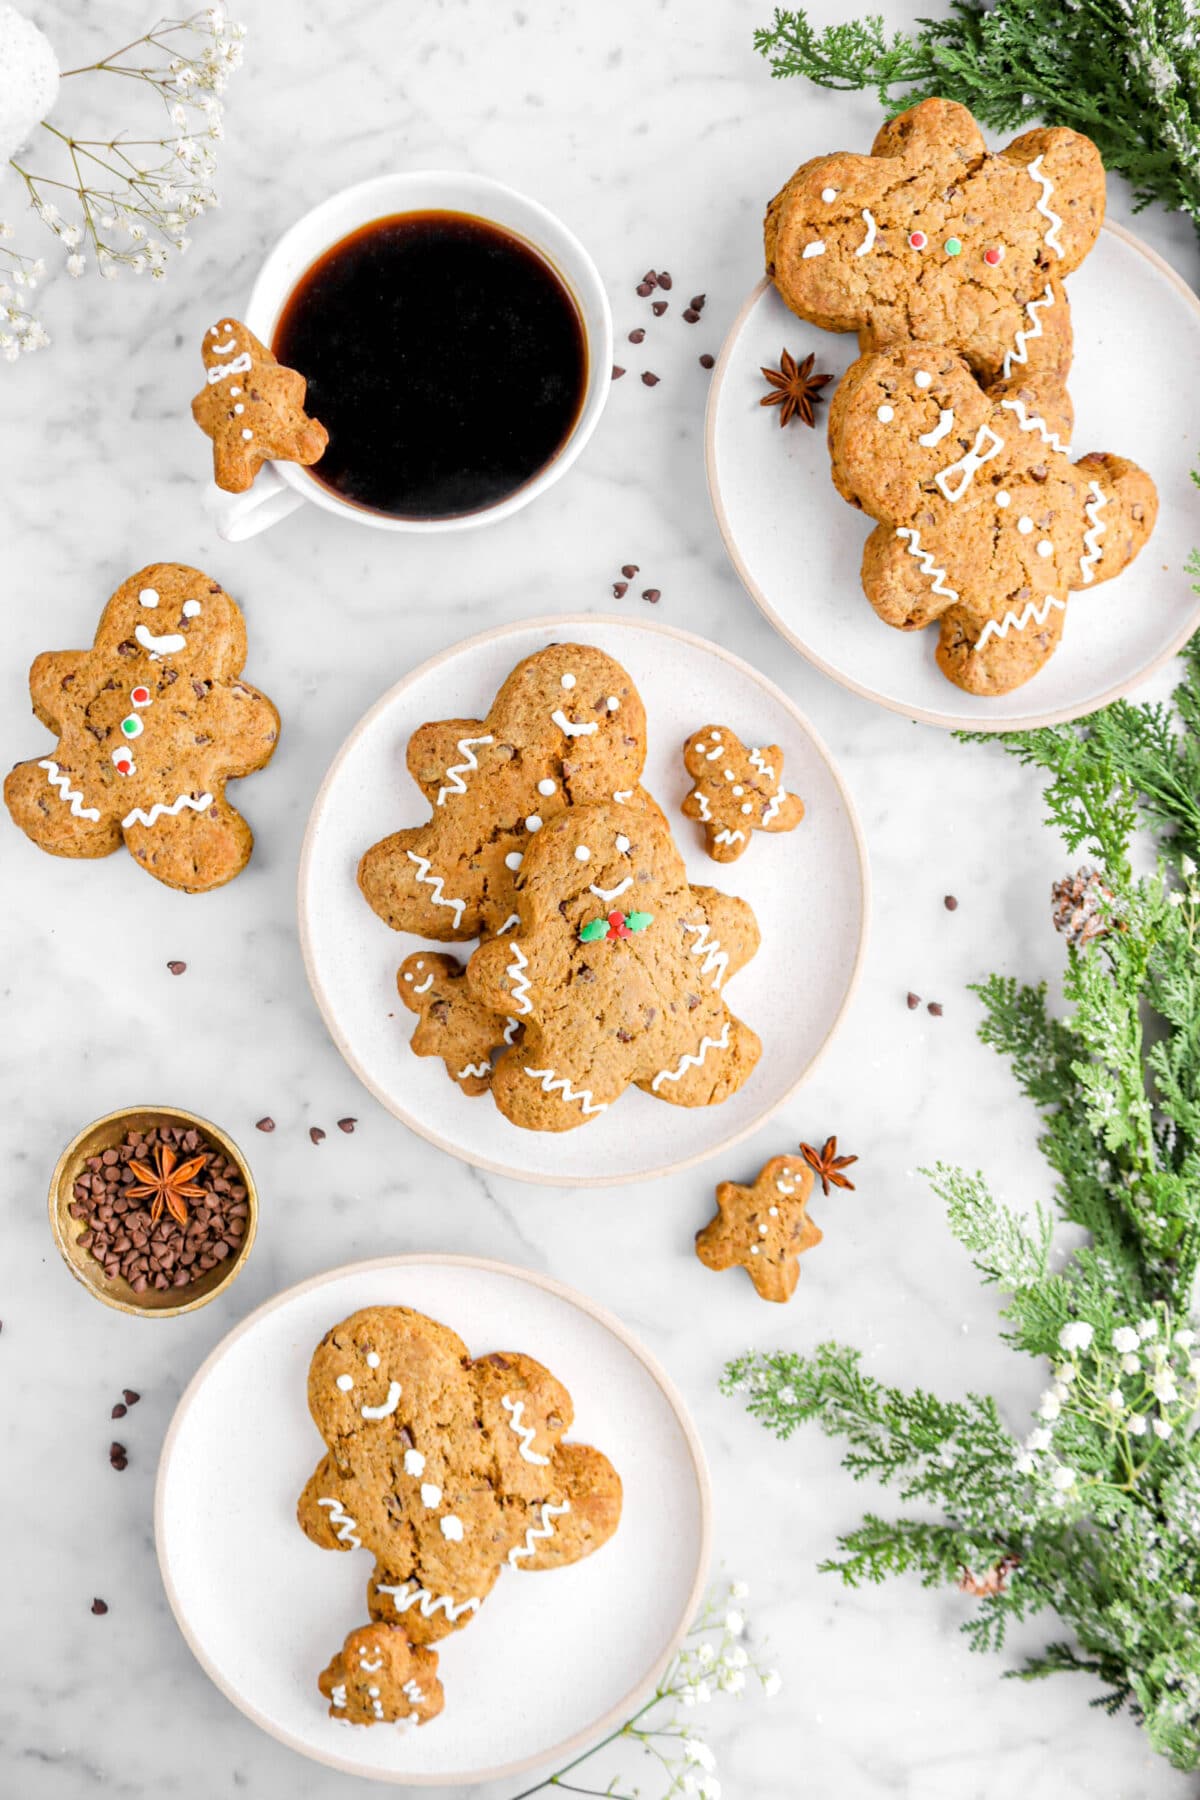 pulled back overhead shot of three plates with gingerbread scones on marble surface with greenery beside, gold bowl of mini chocolate chips, and white flowers around.